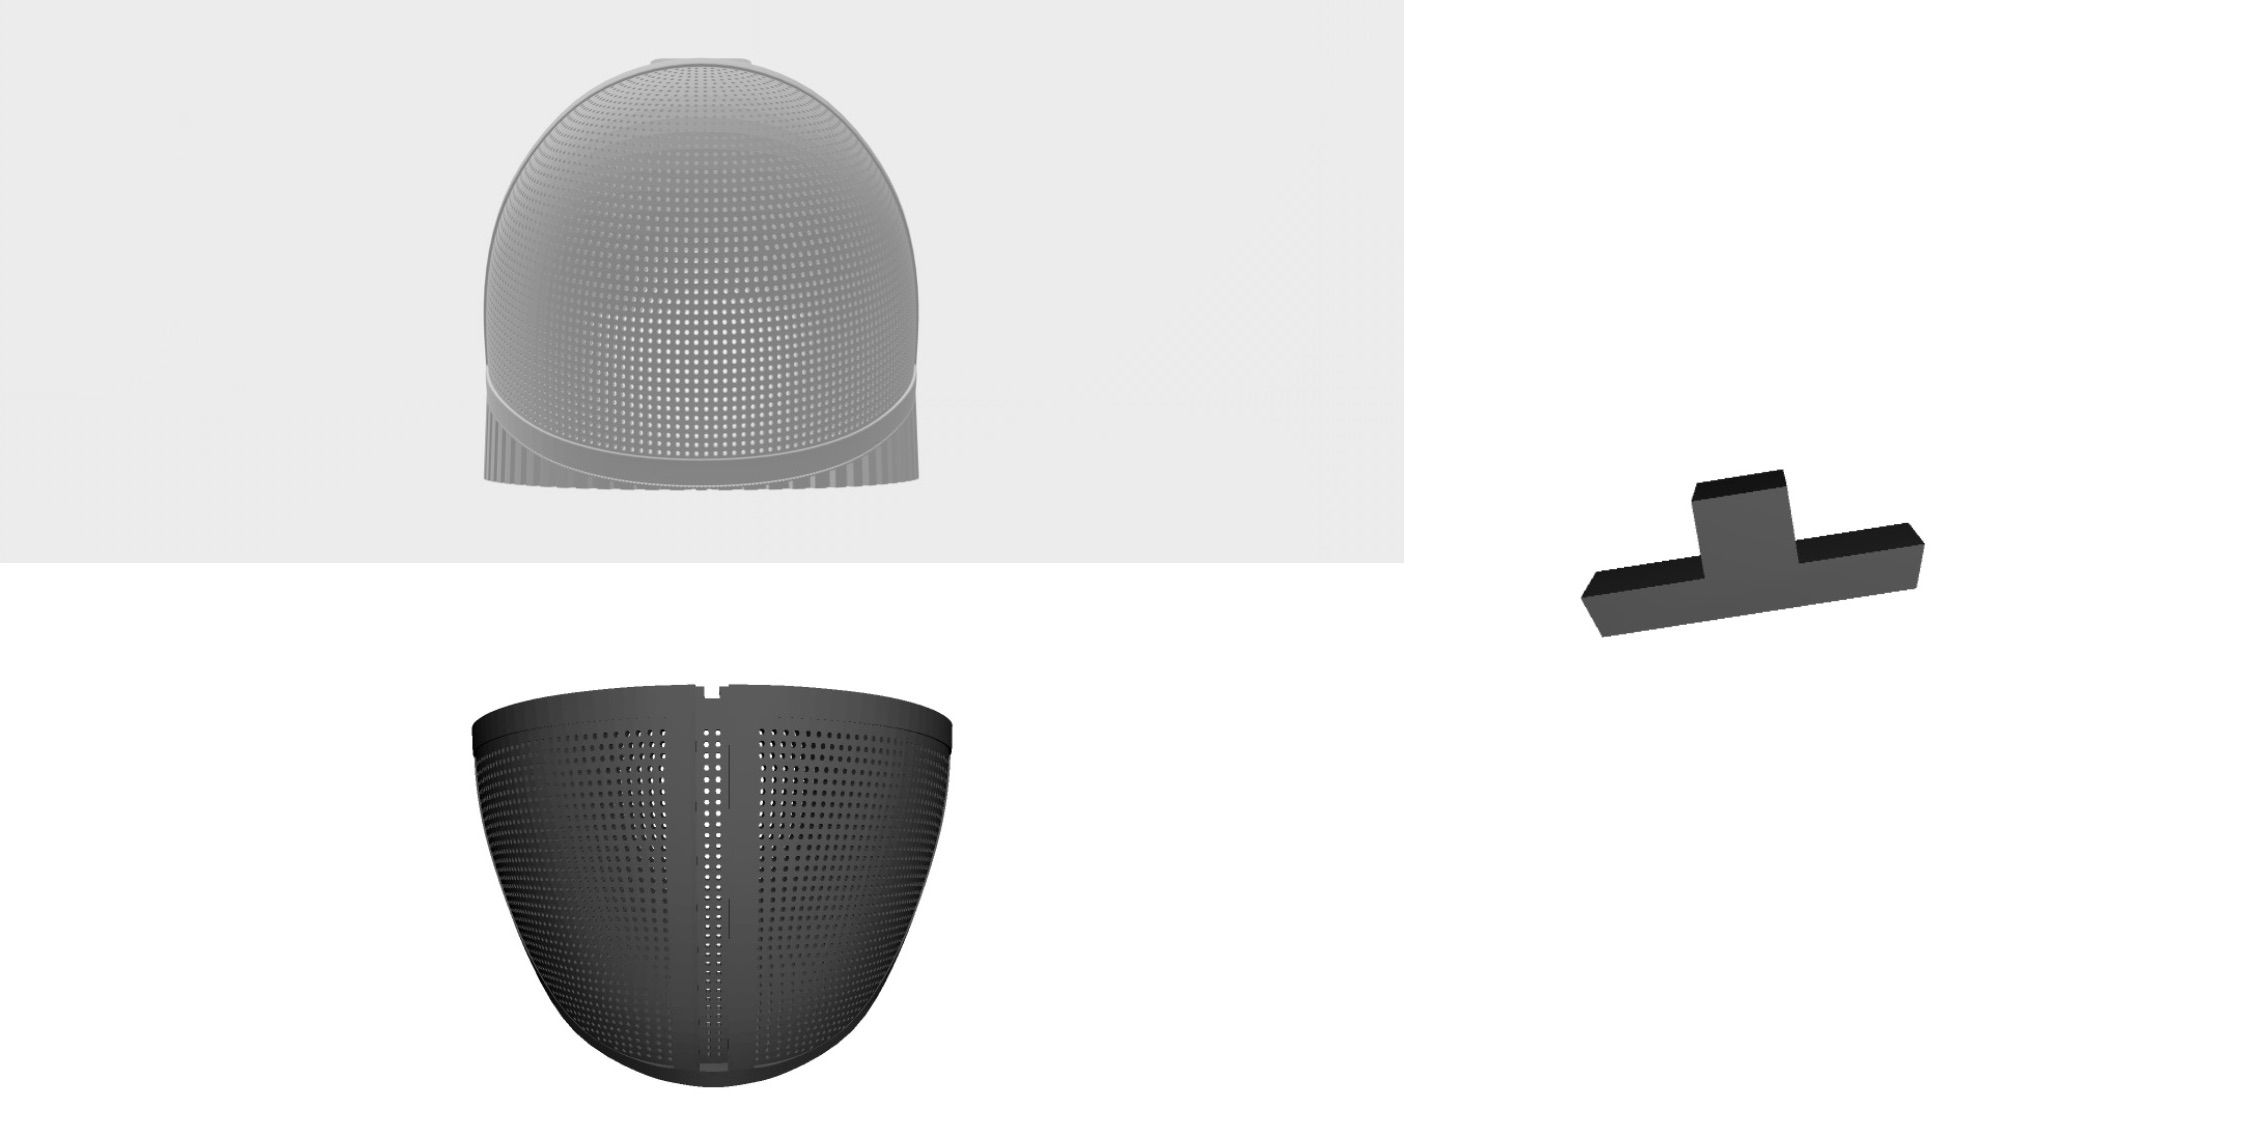 A 3D model of a mesh face mask from Squid Game in two parts, on colored black and the other grey, next to a black T shape part, all models on a white background